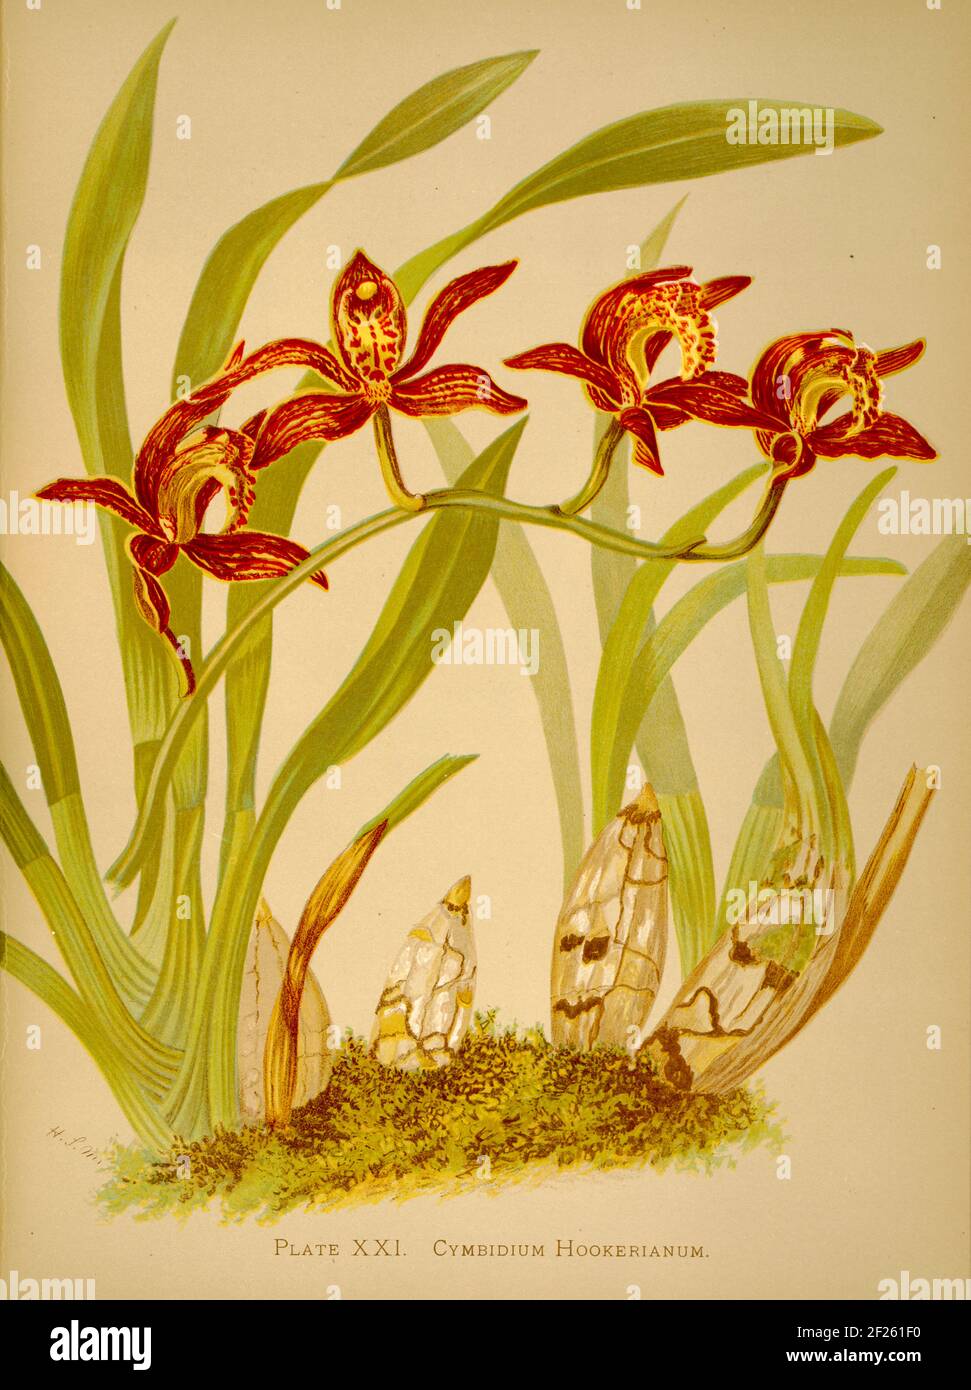 Harriet Stewart Miner's botanical vintage illustration from Orchids - The Royal Family of Plants from 1885 - Cymbidium hookerianum Stock Photo